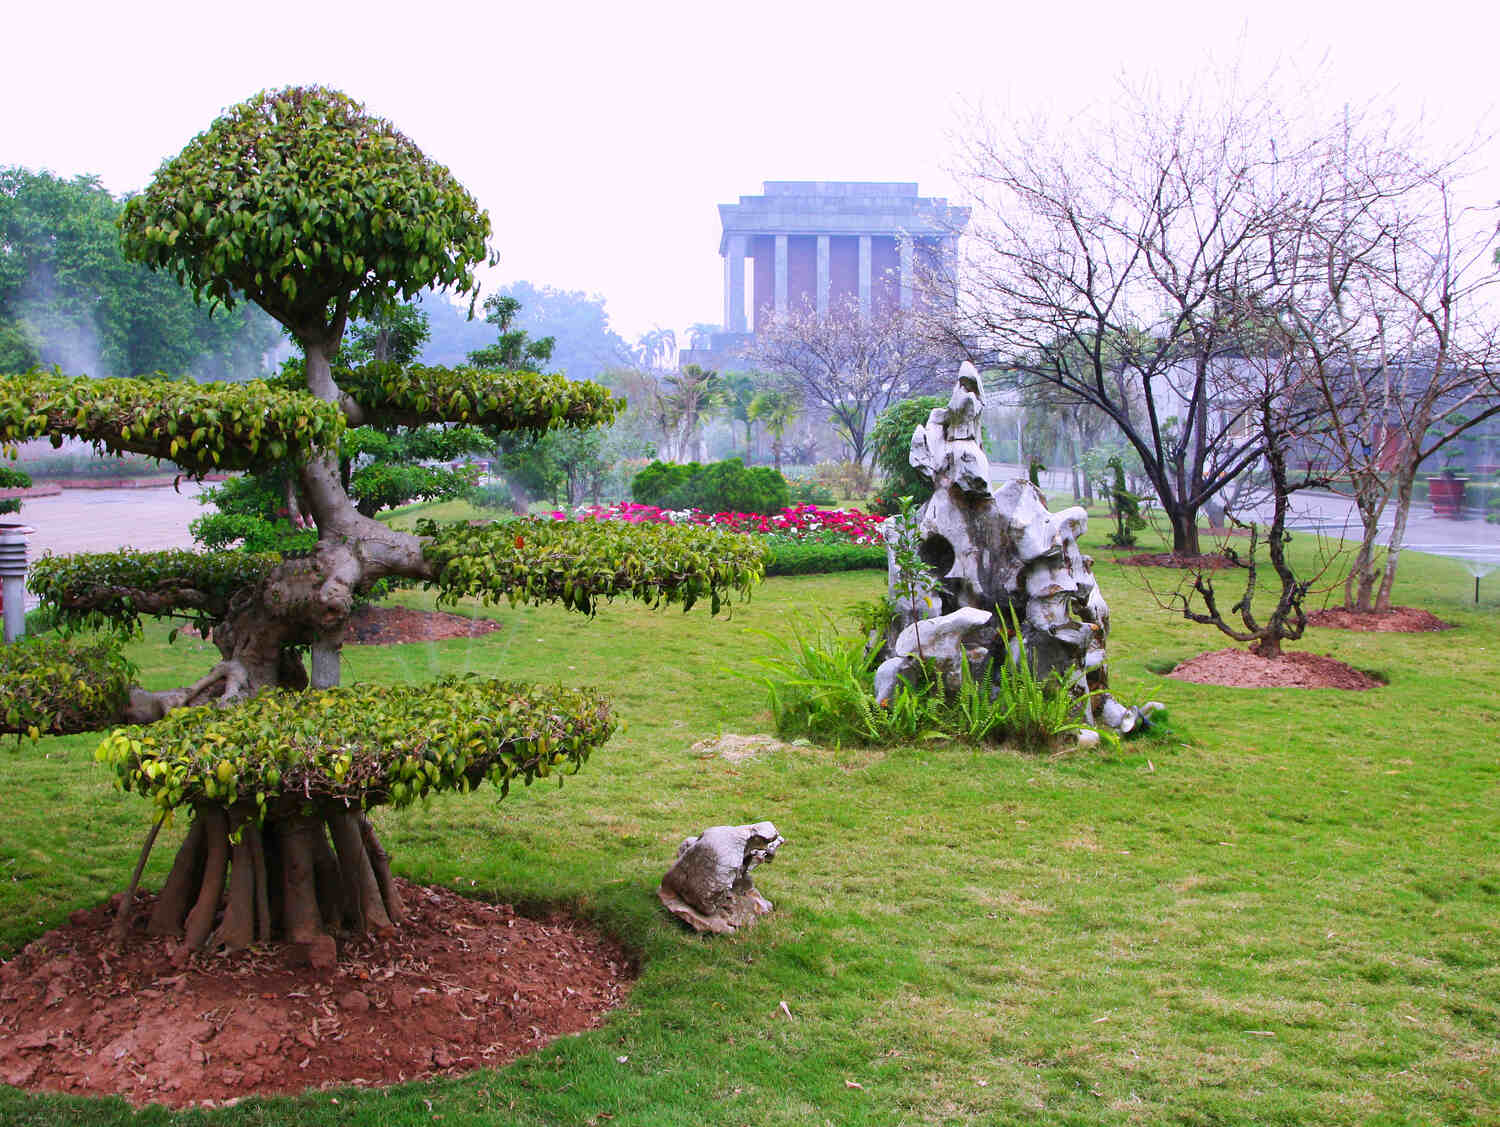 Sculpted bonsai trees and rock garden elements in a serene park with a misty Ho Chi Minh Mausoleum backdrop